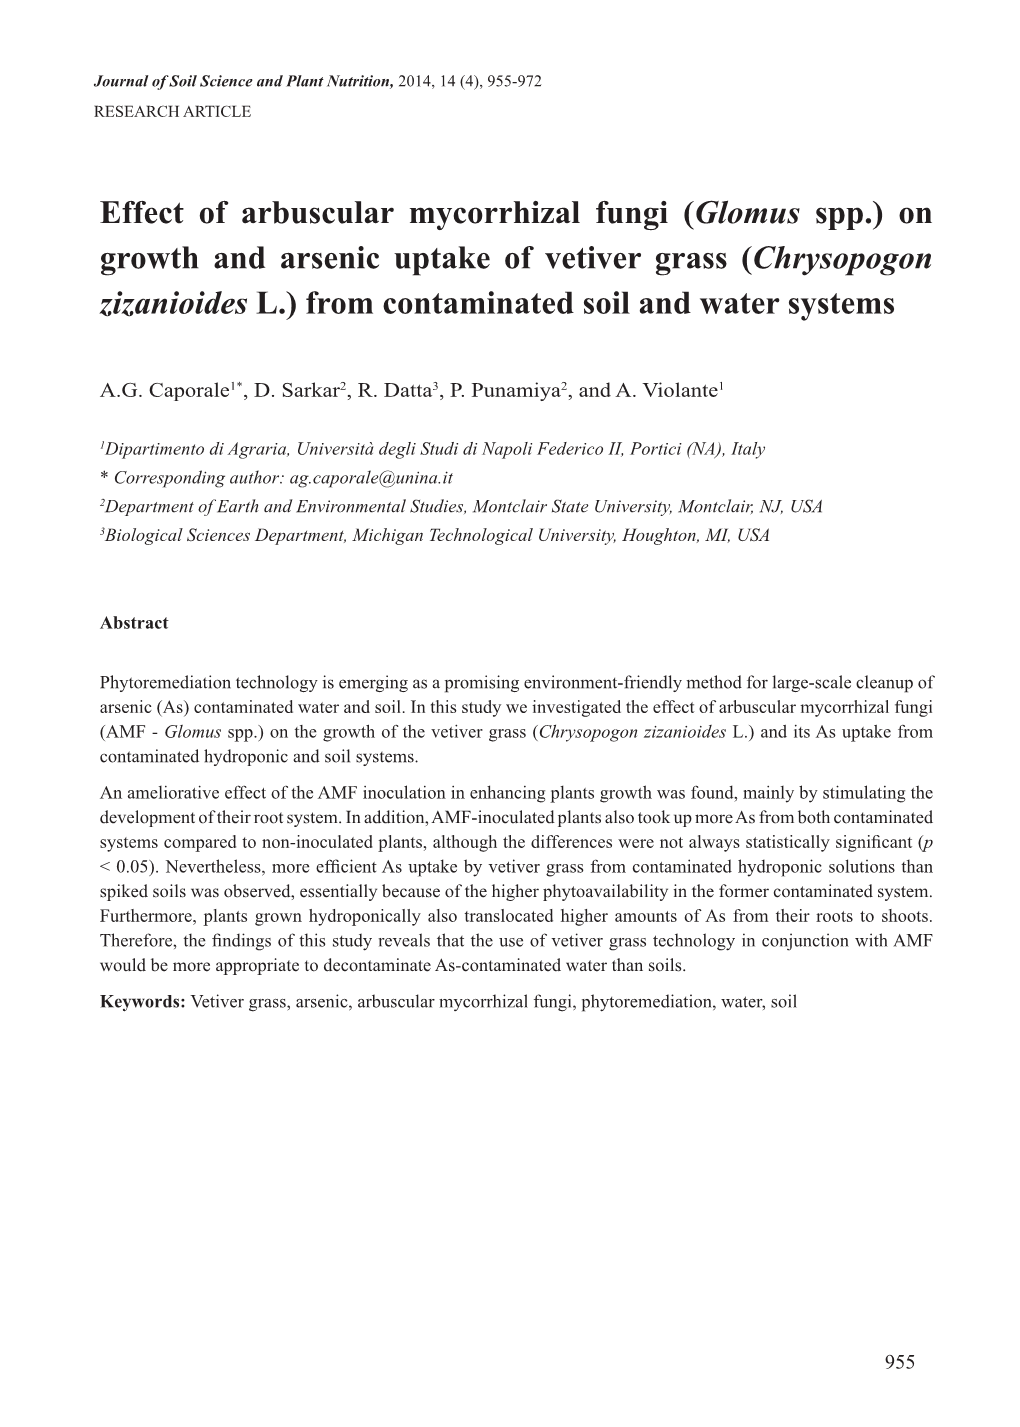 (Glomus Spp.) on Growth and Arsenic Uptake of Vetiver Grass (Chrysopogon Zizanioides L.) from Contaminated Soil and Water Systems